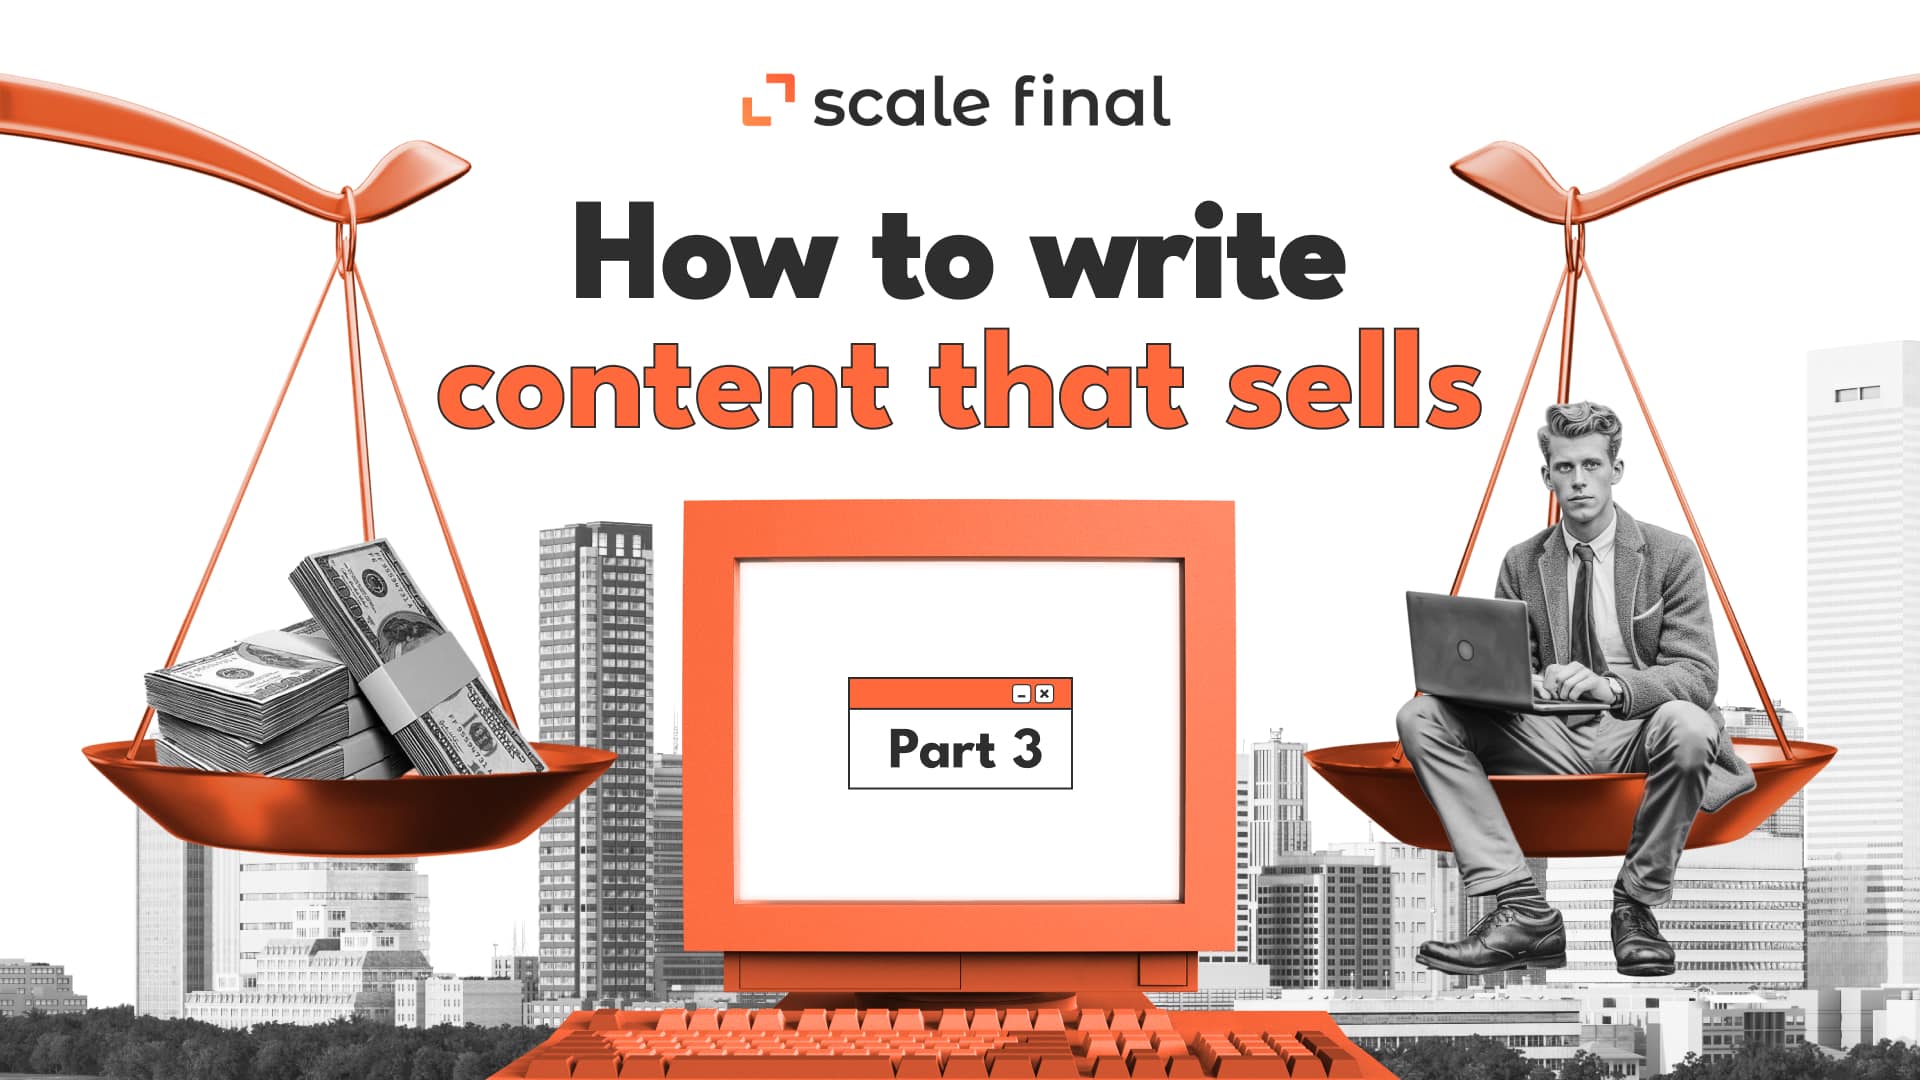 How to create content that sells. Part 3